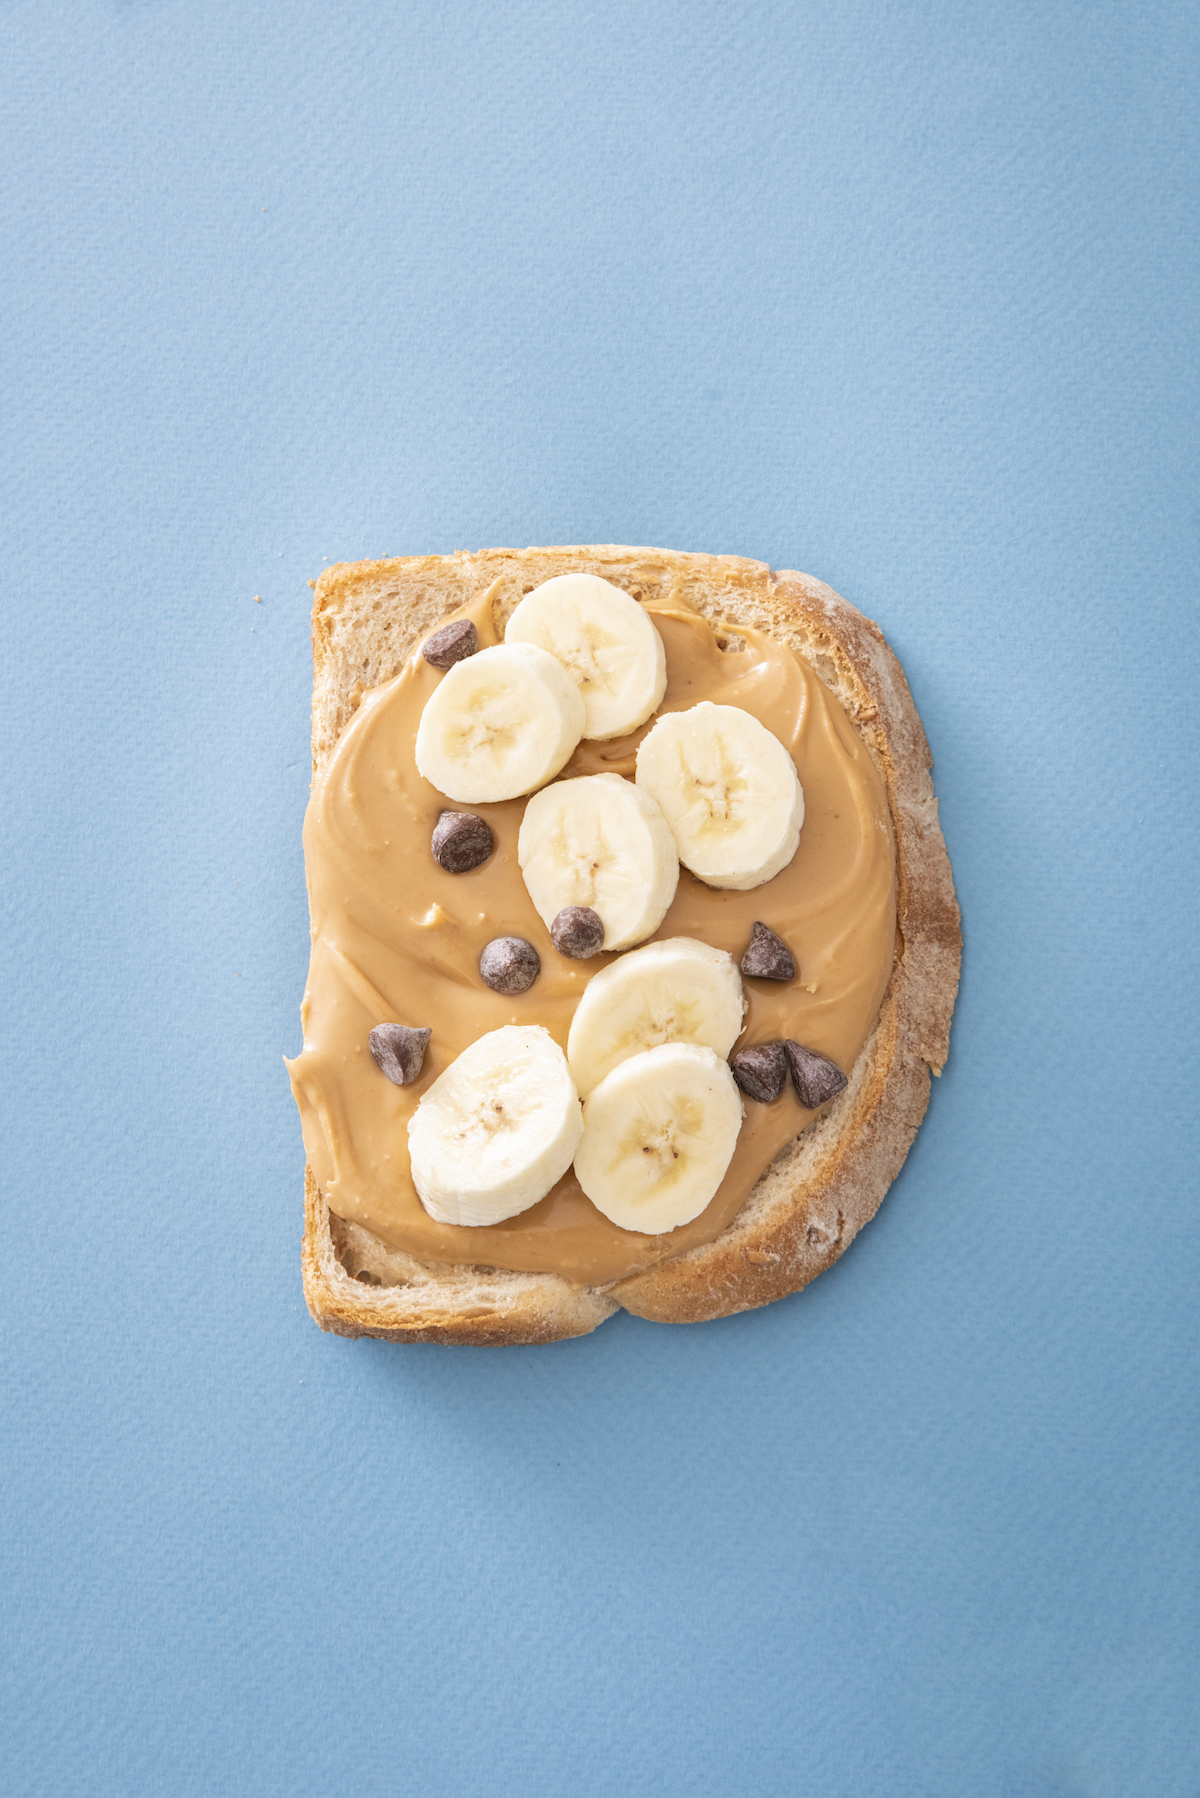 open face sandwich with peanut butter, bananas and chocolate chips